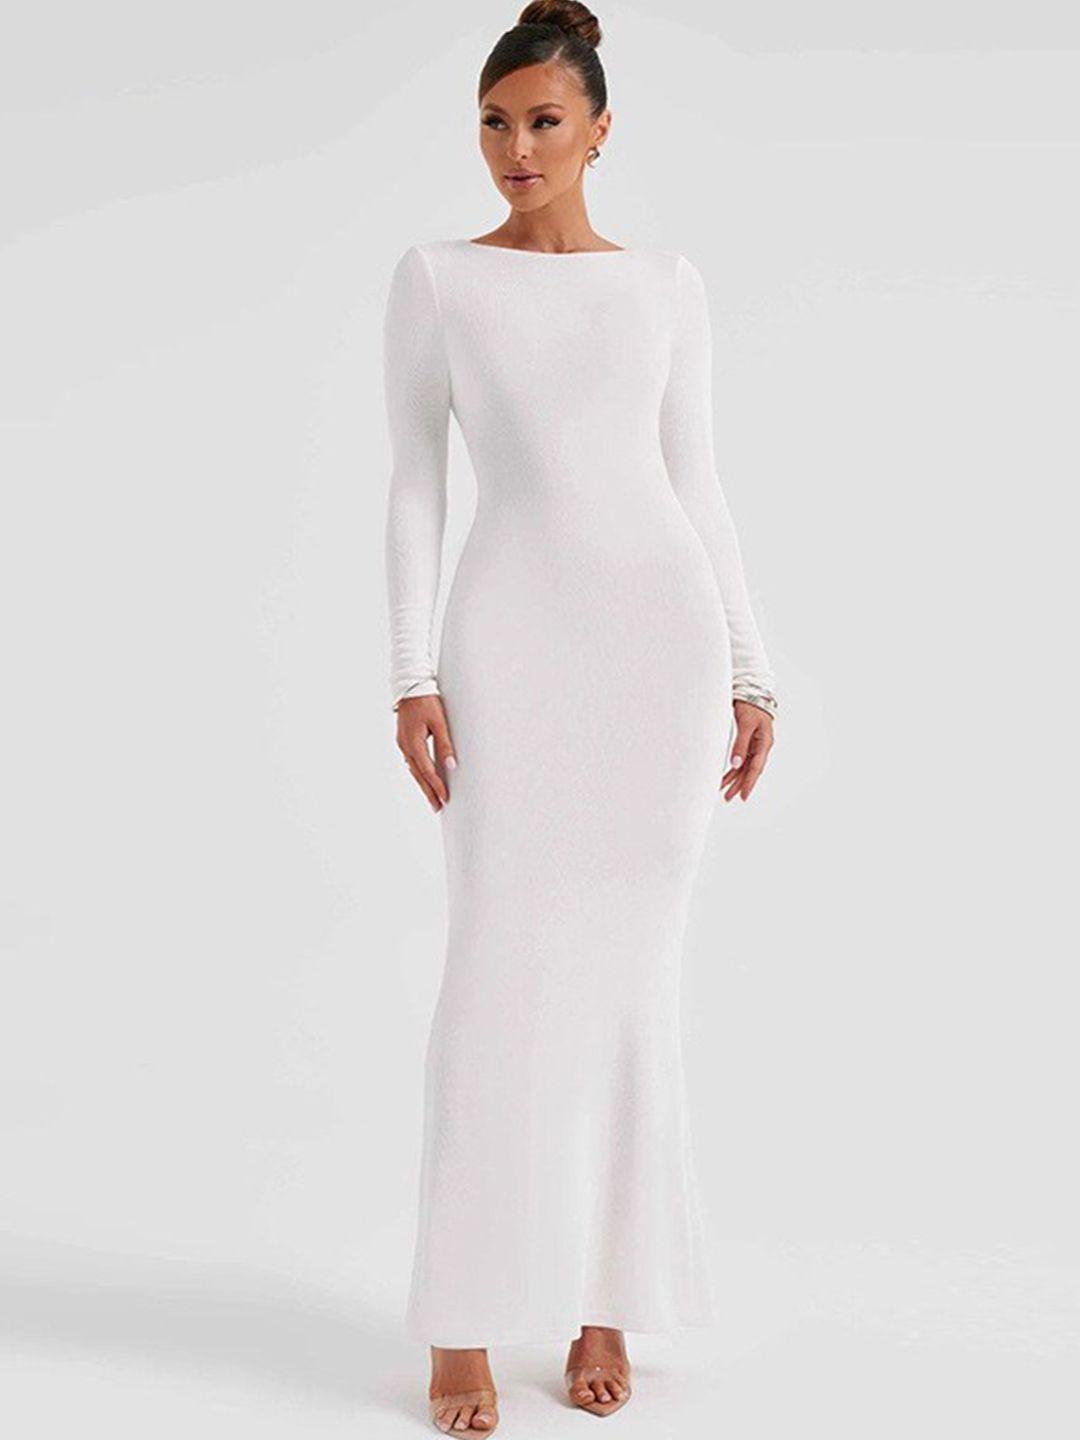 stylecast white & orchid tint maxi dress